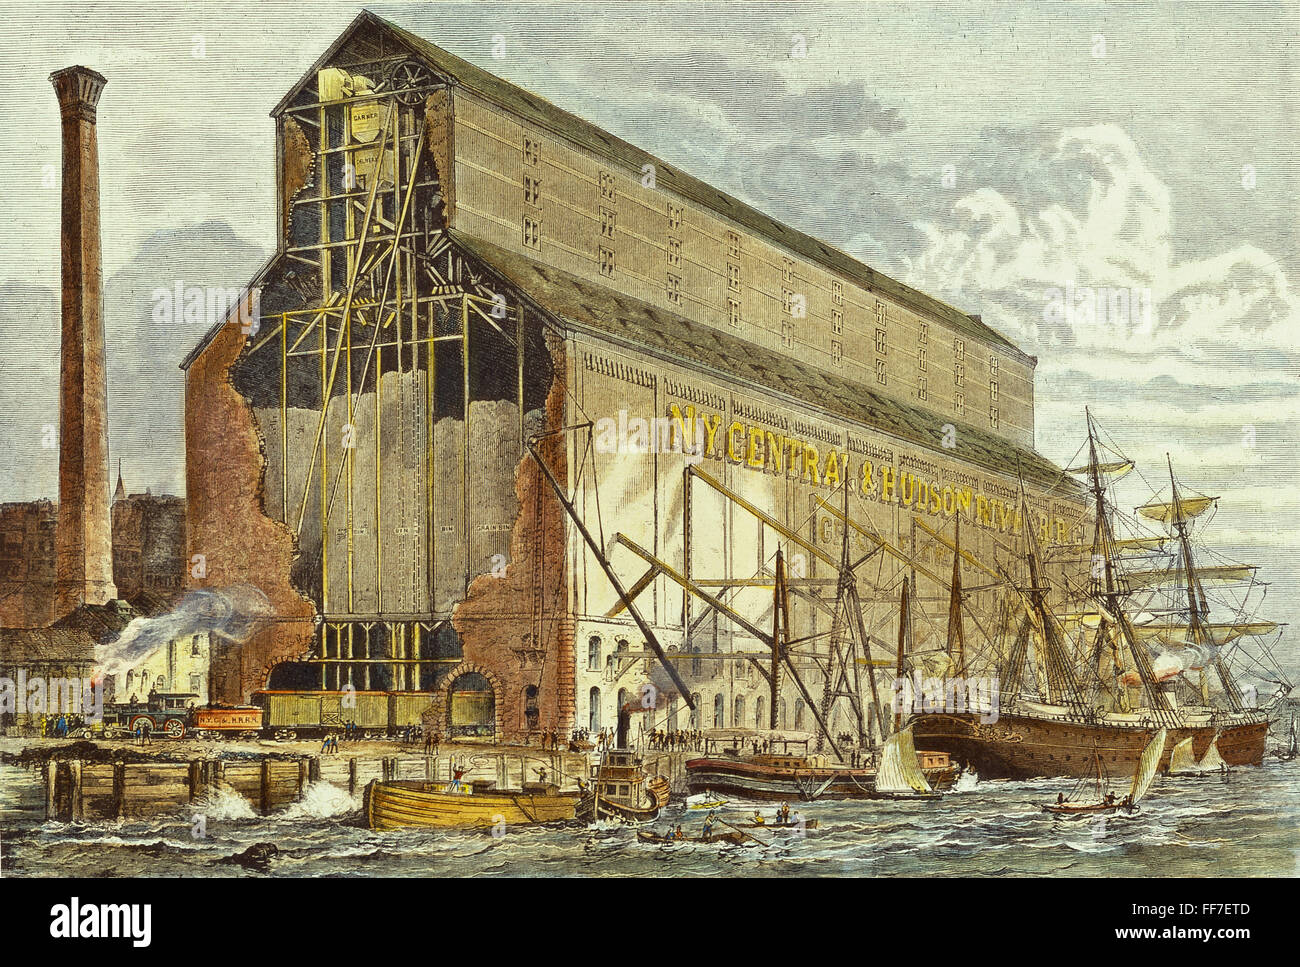 NEW YORK: GRAIN ELEVATOR. /nThe 380 foot long, 150 foot high grain elevator of the New York Central & Hudson River Railroad at the Hudson River and 60th Street in New York City. Wood engraving, American, 1877. Stock Photo